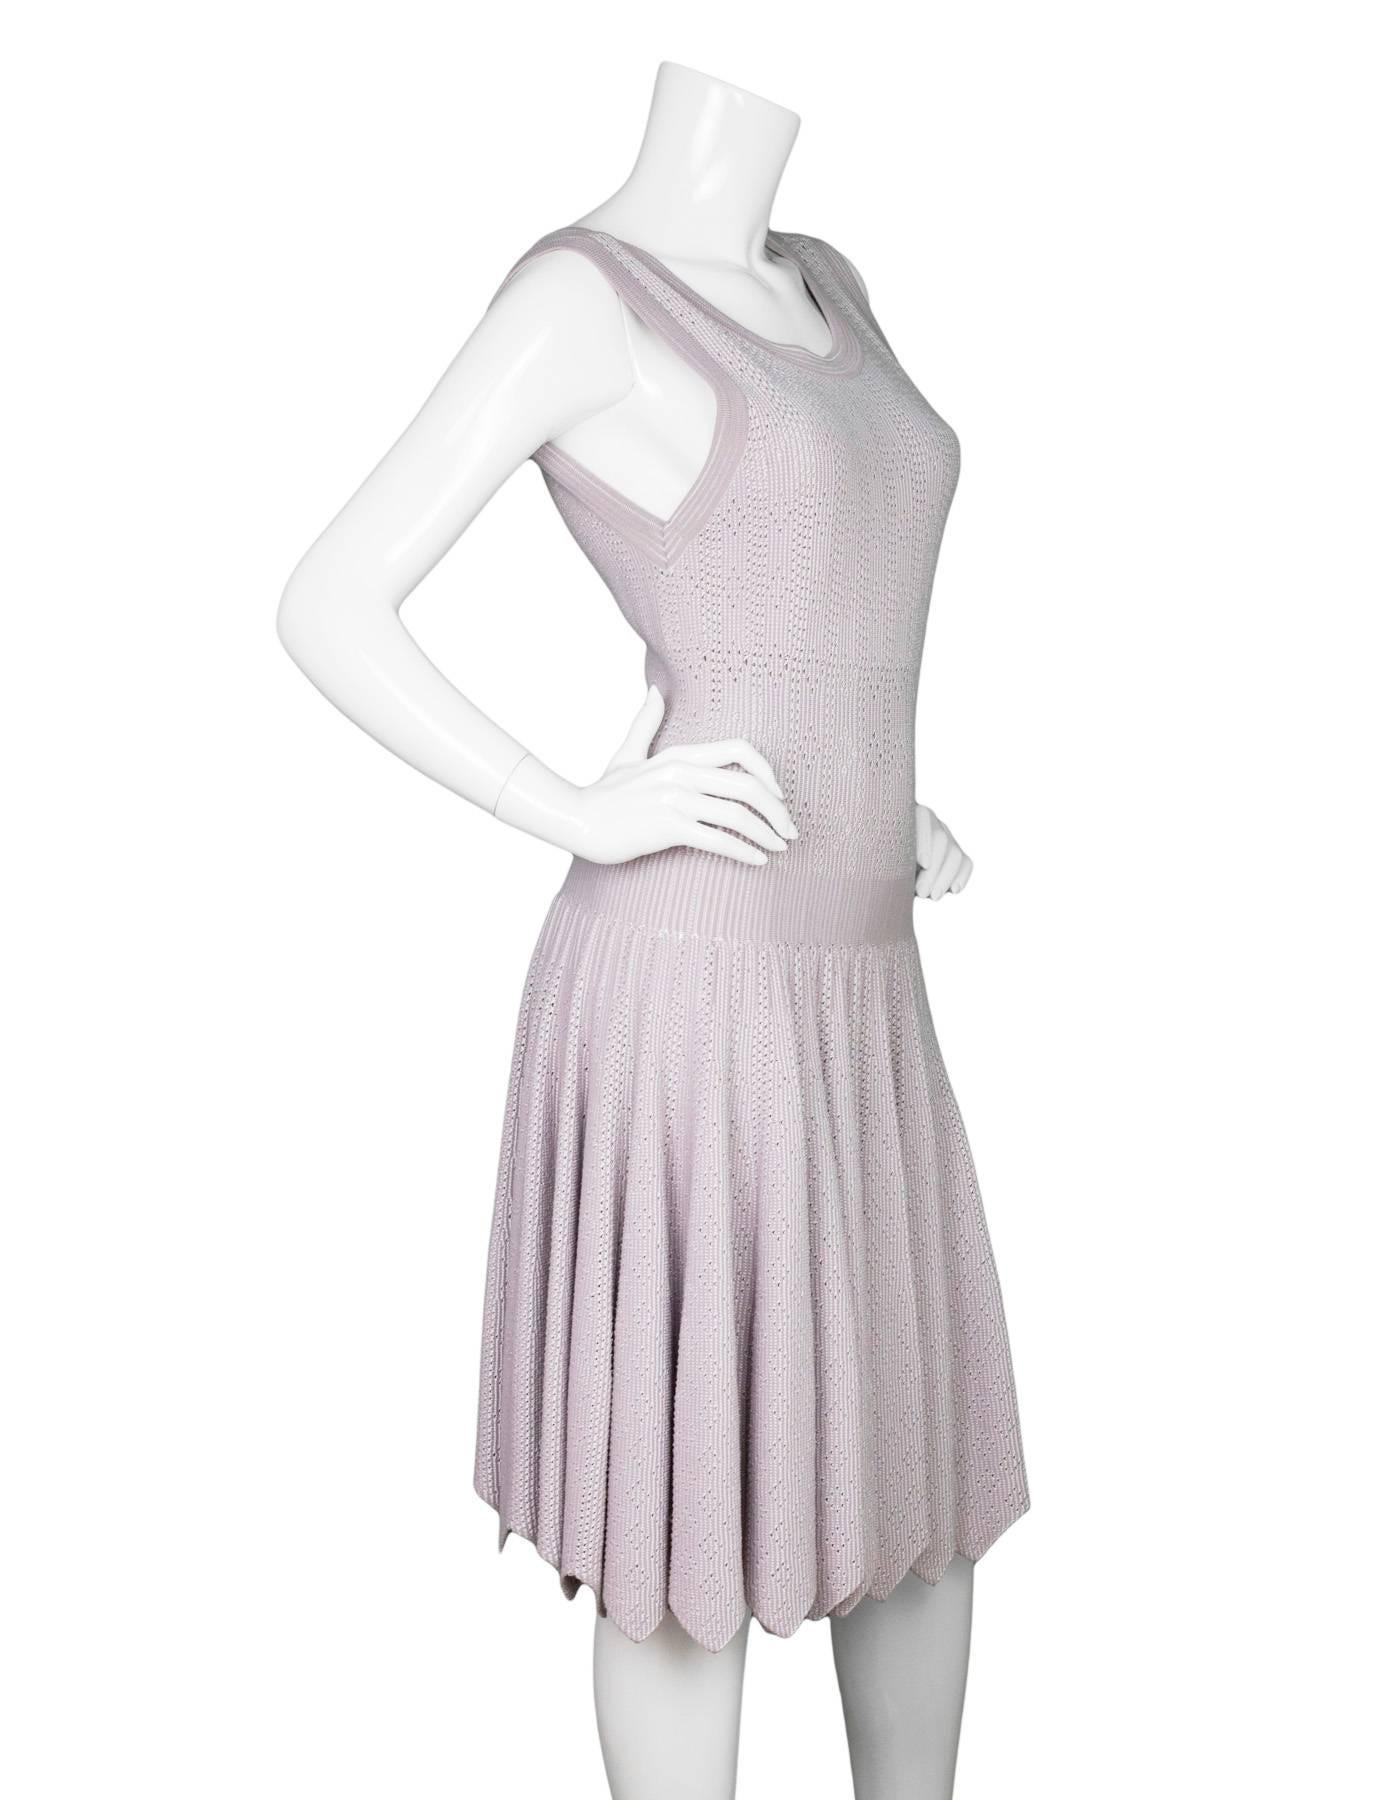 Alaia Mauve Eyelet Fit and Flare Dress Sz FR42
Features eyelet throughout

Made In: Italy
Color: Mauve / lavender
Composition: 85% viscose, 10% polyester, 5% nylon
Lining: None
Closure/Opening: Back zip closure
Overall Condition: Excellent pre-owned